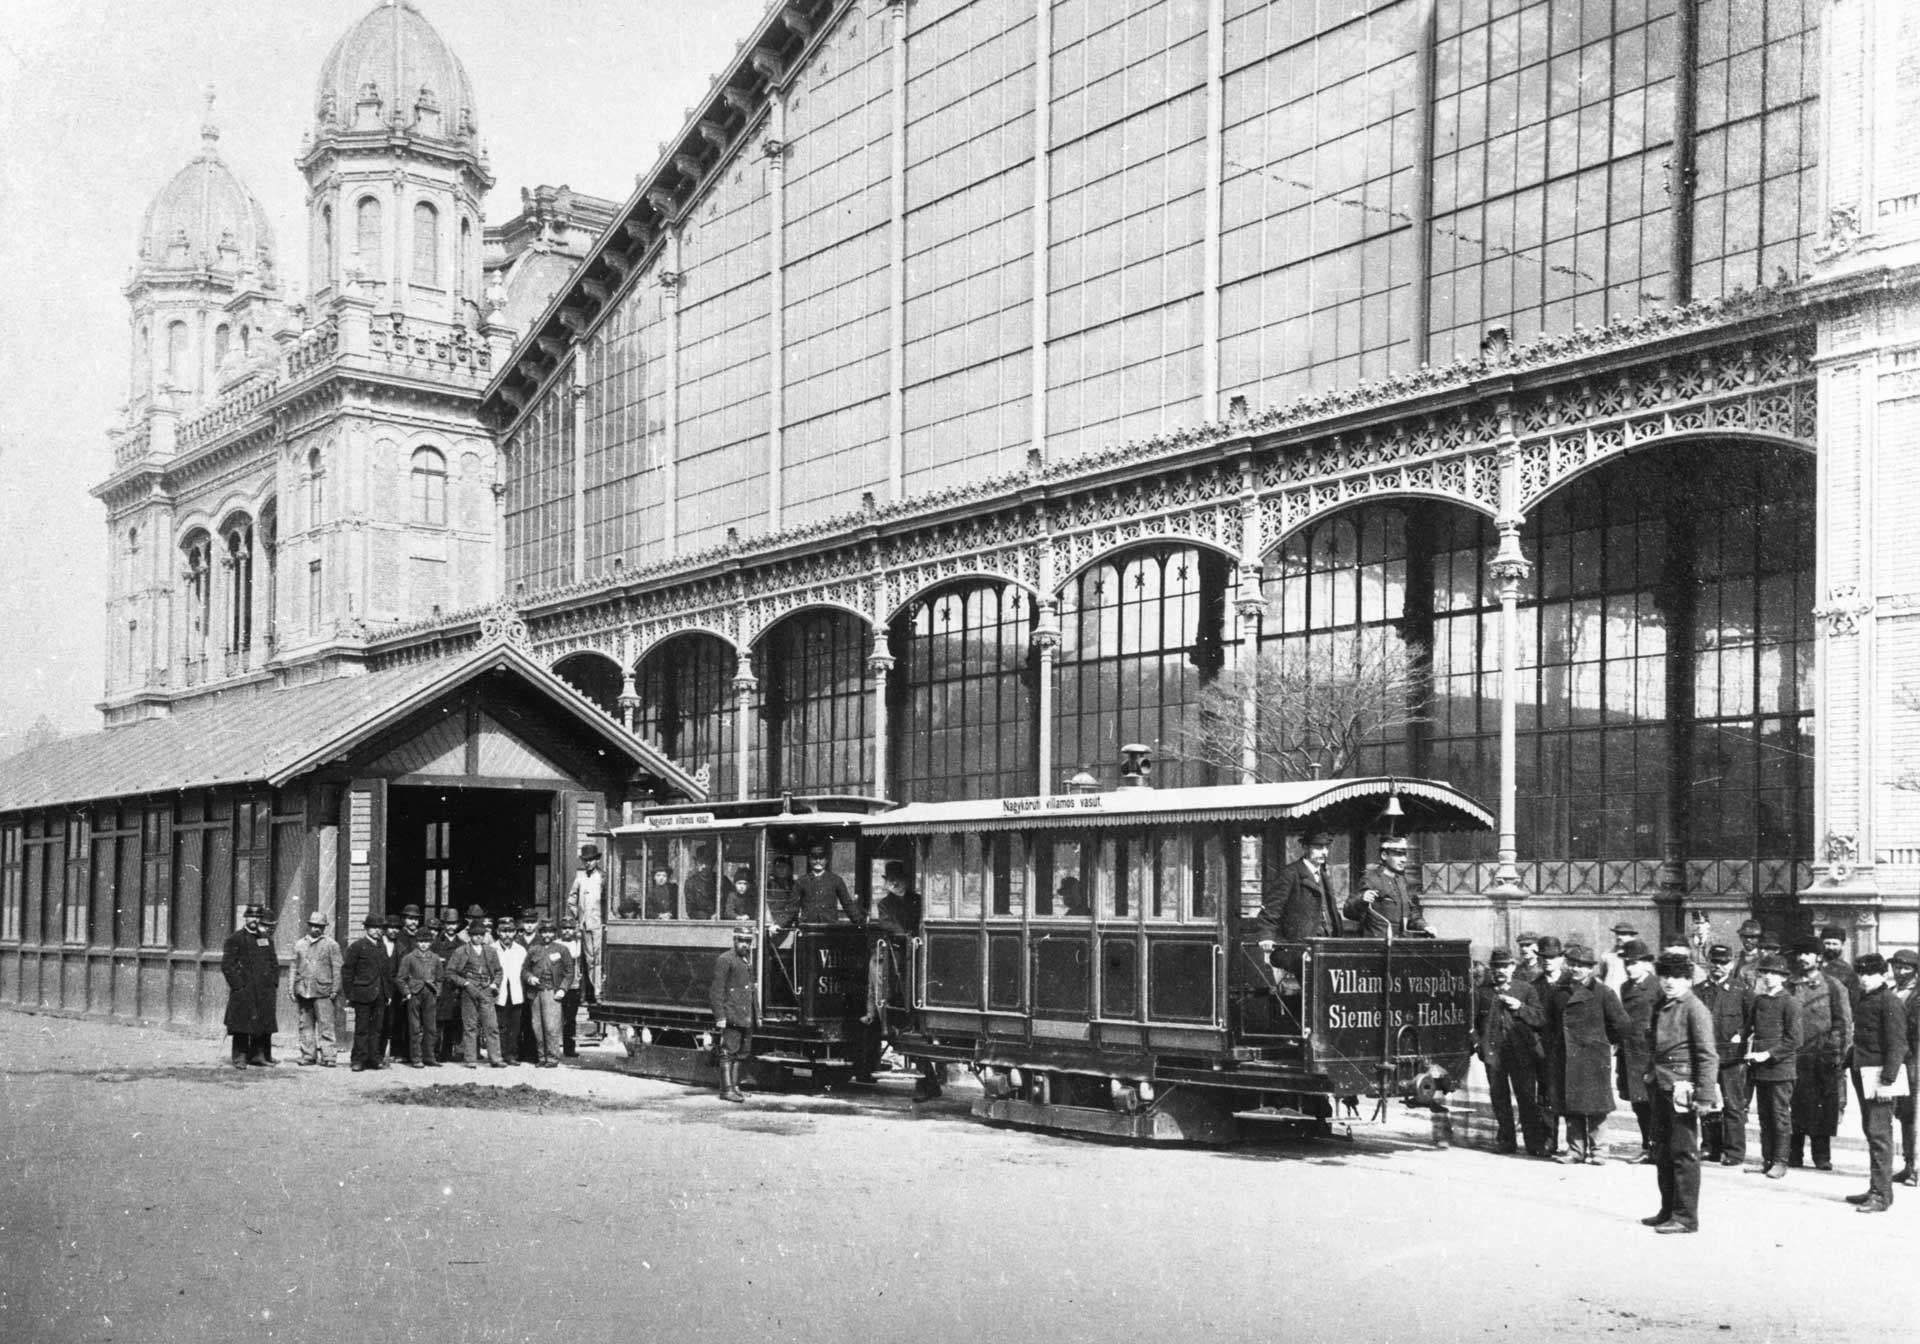 Teréz Boulevard, Nagykörúti trial tram terminus in front of Western railway station. The photo was made in 1887 (source: Fortepan / Tibor Somlai)